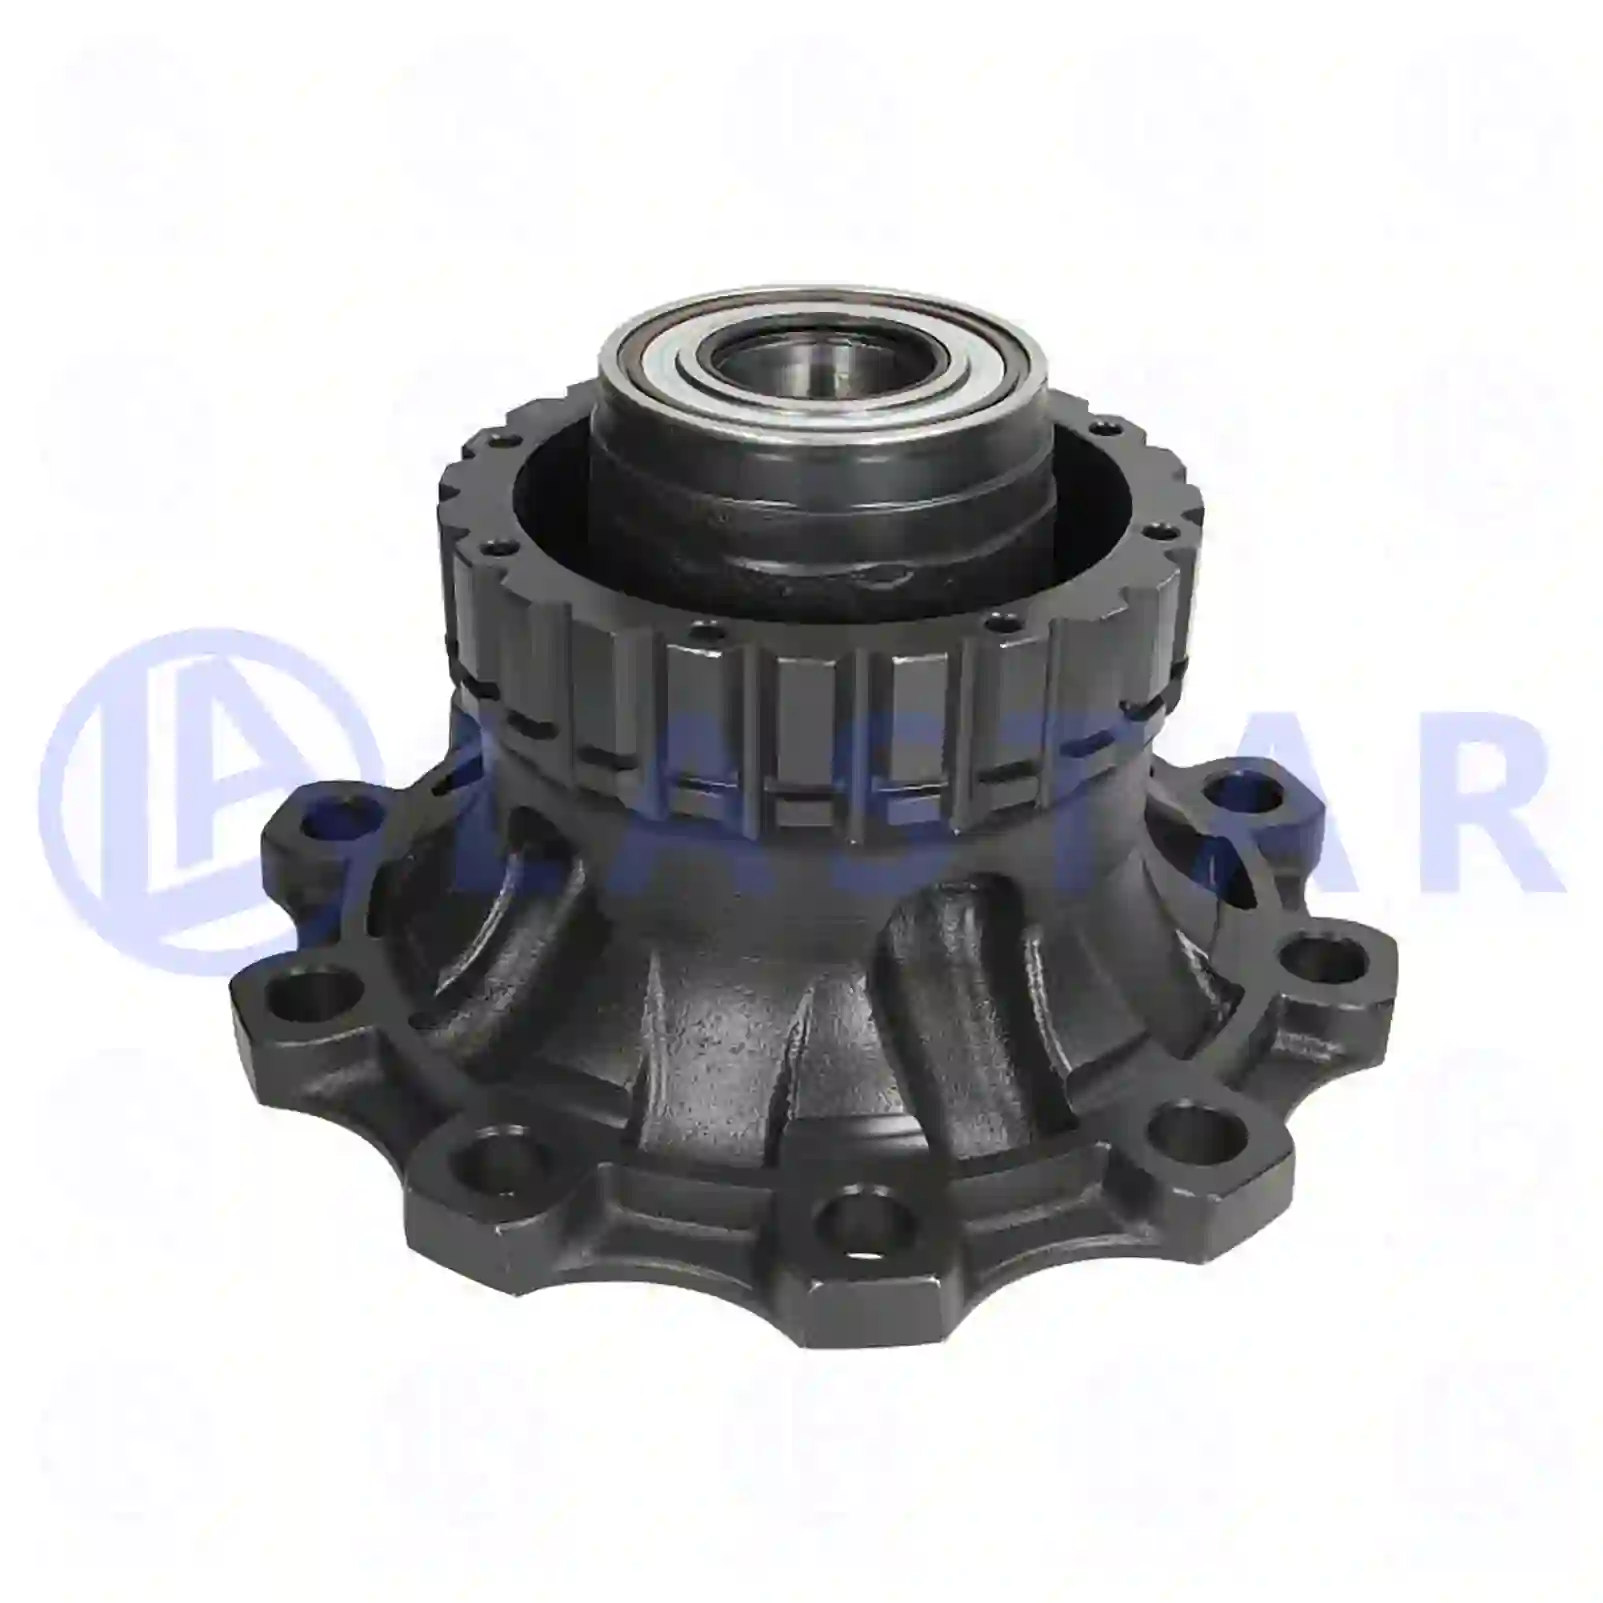 Wheel hub, without bearings, 77726162, 3989919, 85105692, 85111792, , , ||  77726162 Lastar Spare Part | Truck Spare Parts, Auotomotive Spare Parts Wheel hub, without bearings, 77726162, 3989919, 85105692, 85111792, , , ||  77726162 Lastar Spare Part | Truck Spare Parts, Auotomotive Spare Parts